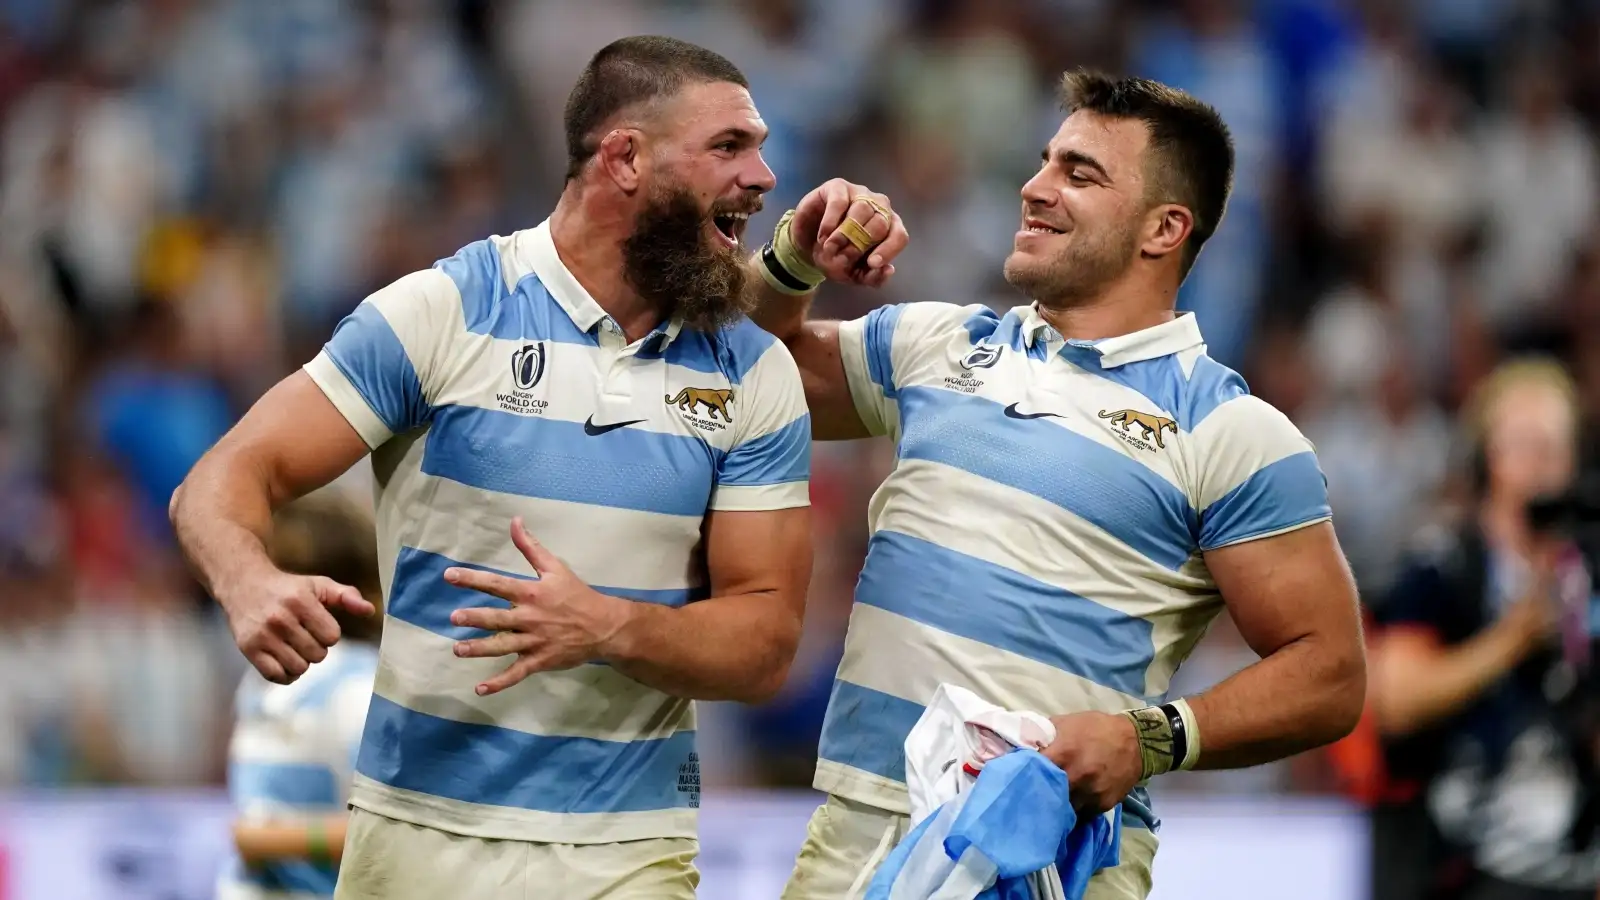 Argentina stars celebrate their quarter-final win in the Rugby World Cup against Wales.